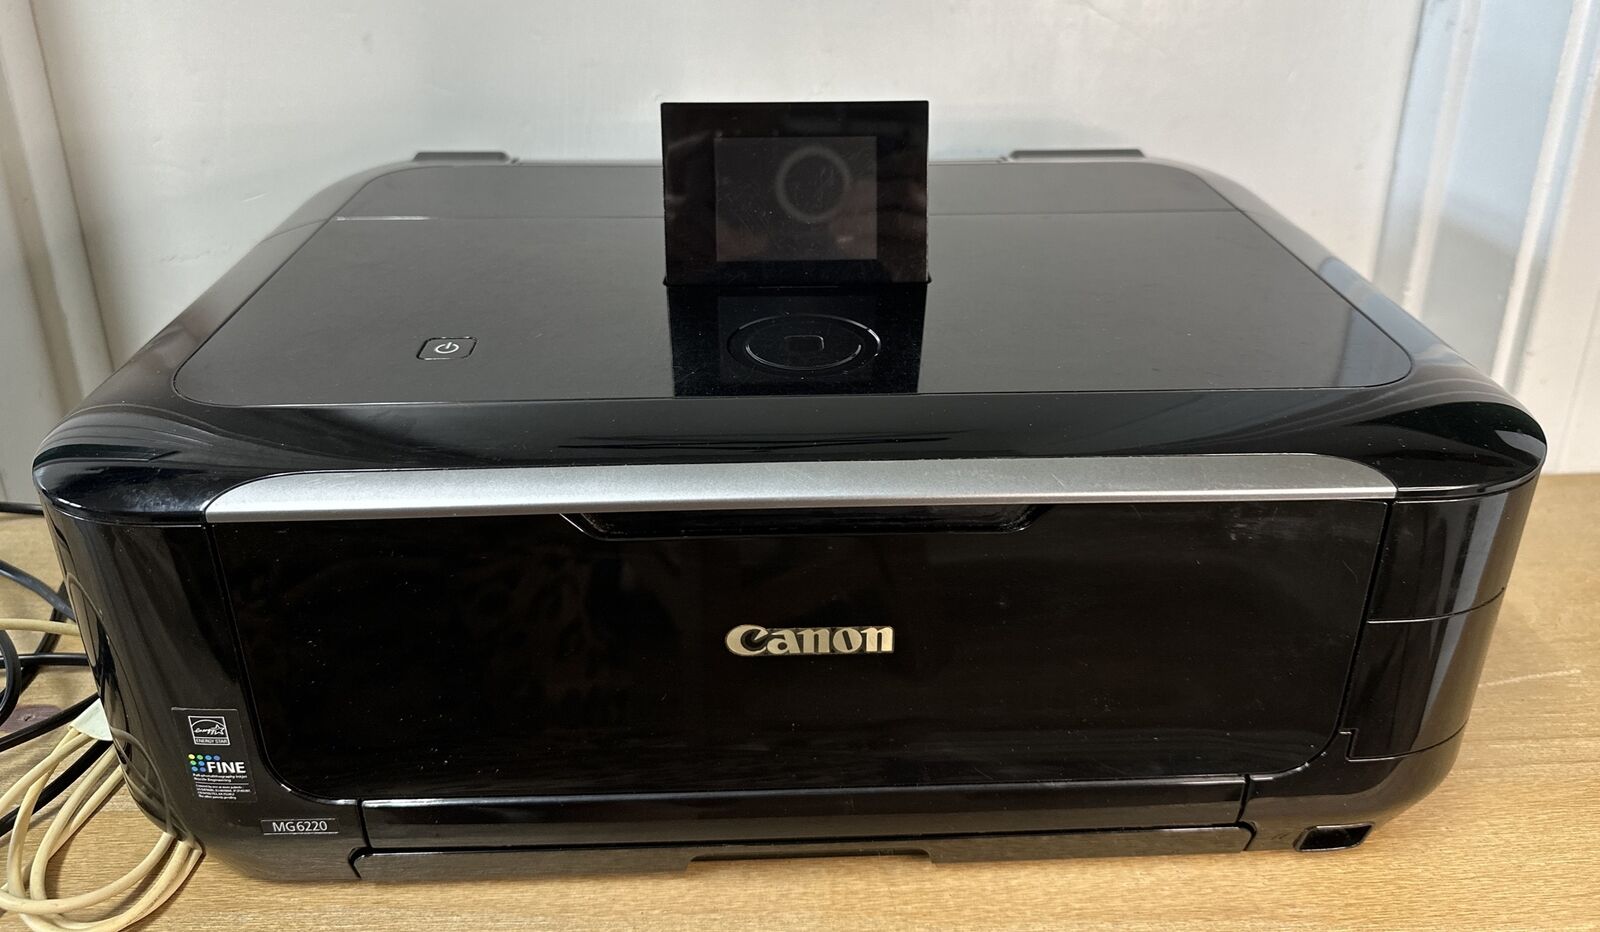 Canon PIXMA MG6220 All-In-One Inkjet Printer + Power Cable